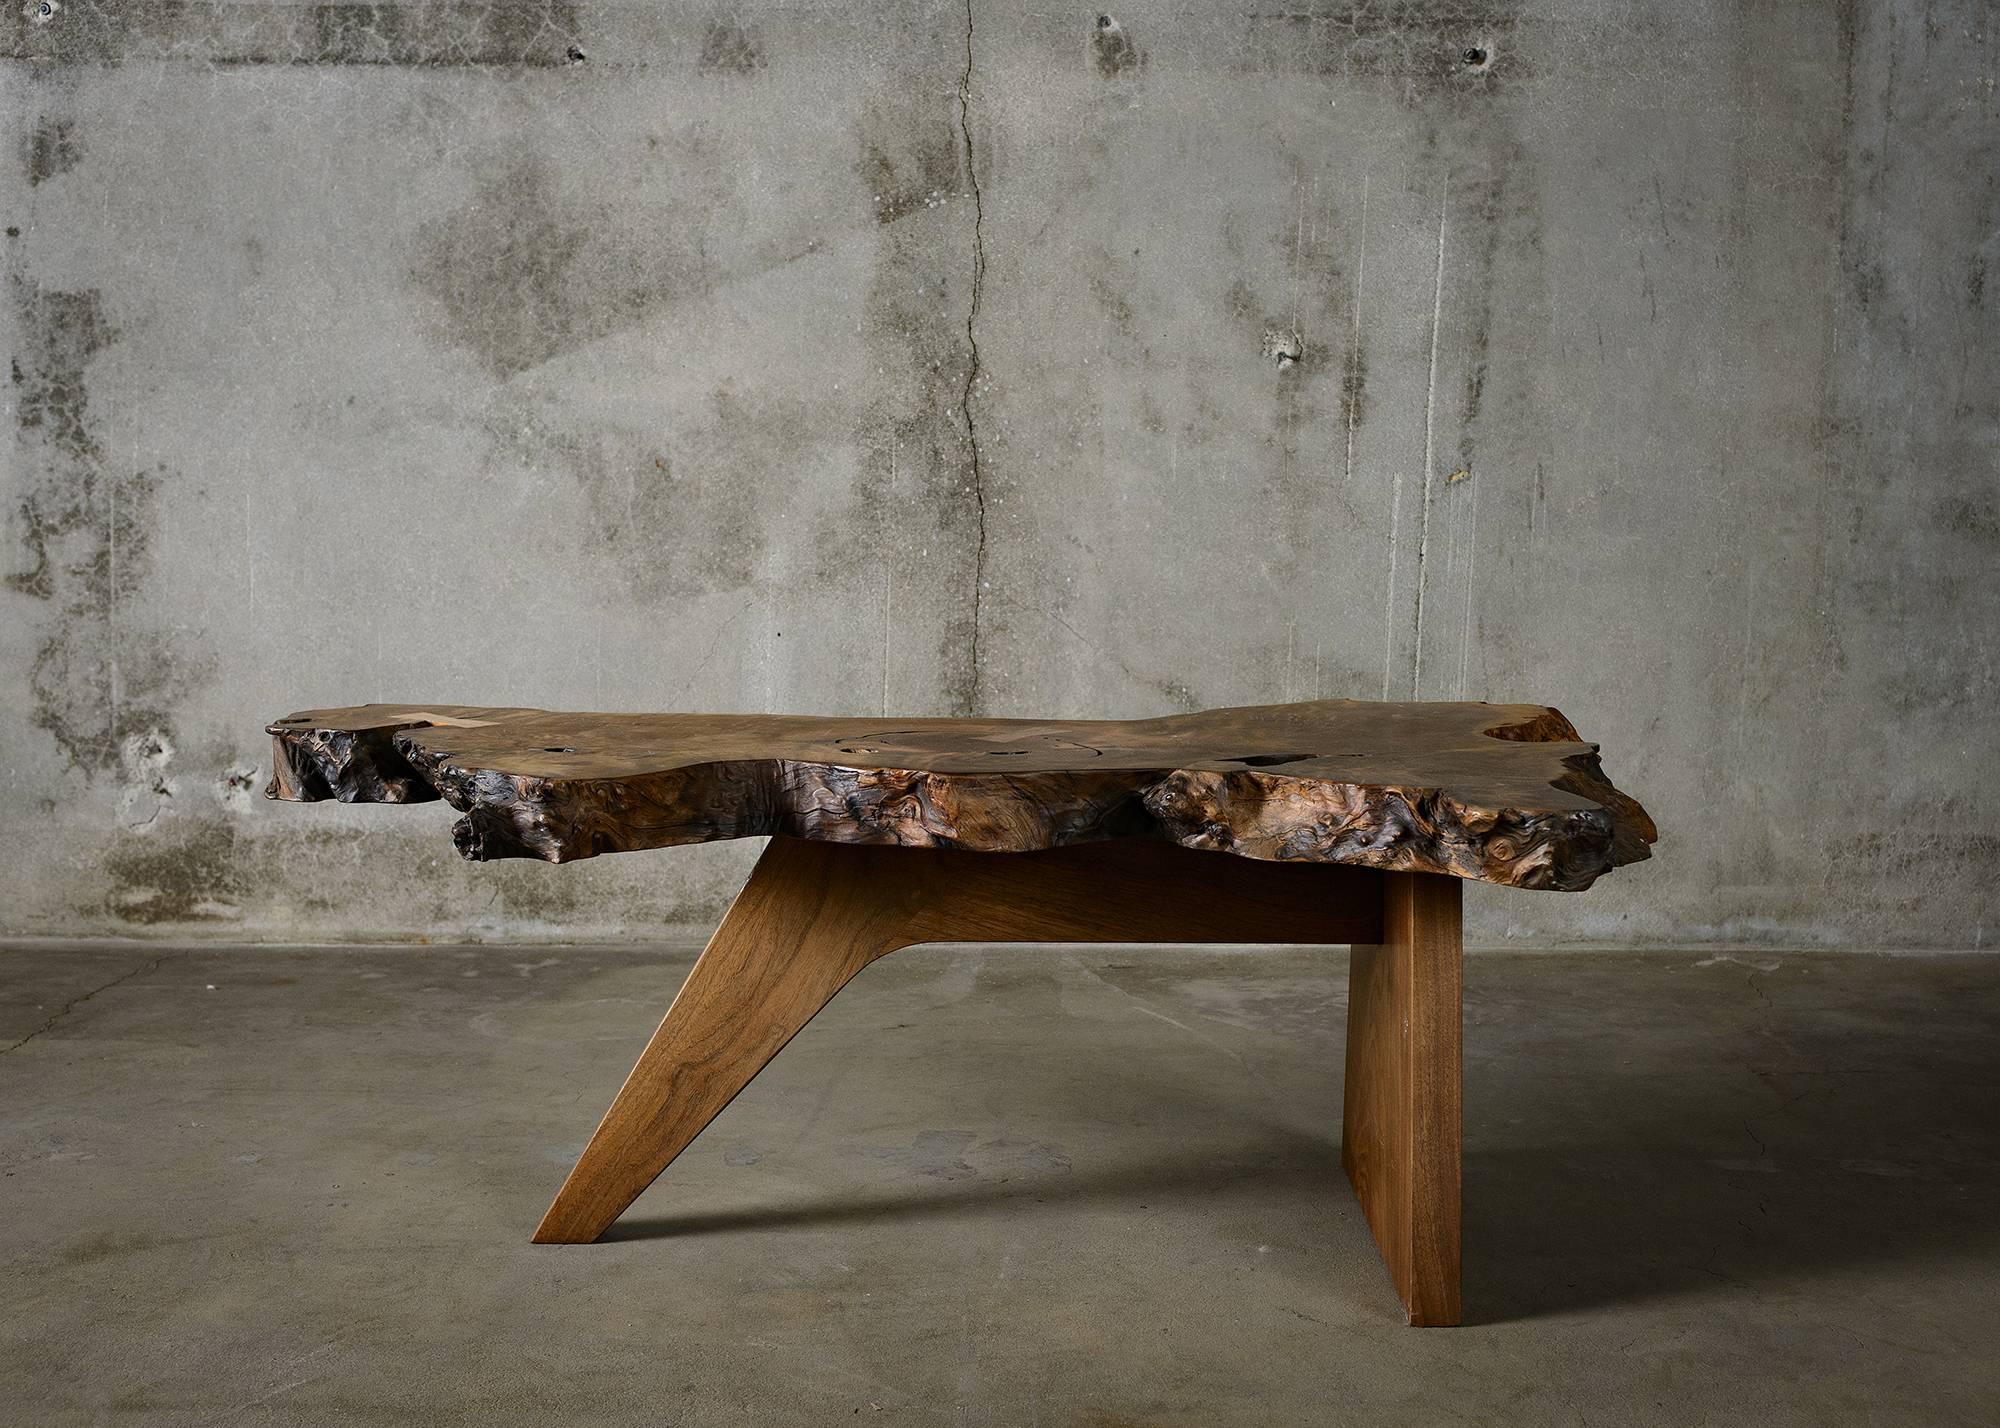 A masterfully crafted Mira Nakashima table from burl wood, the rounded knotty growth on a tree.
 